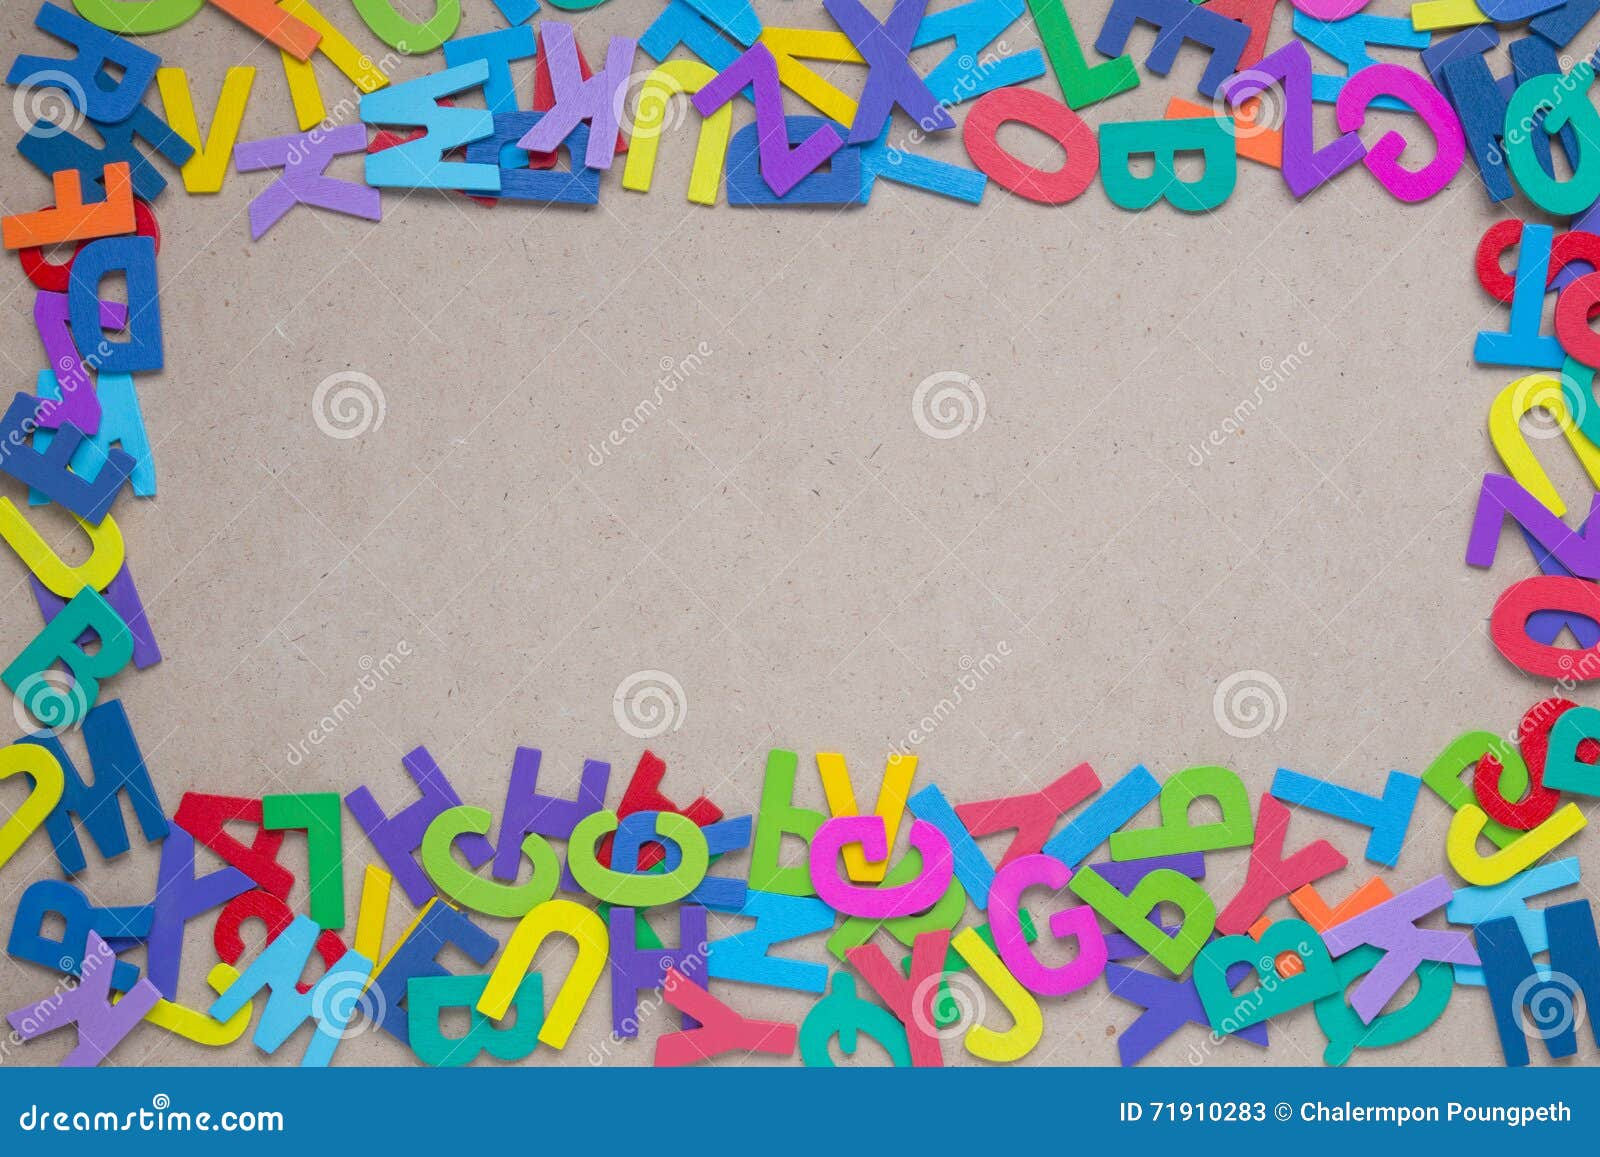 Random Wooden Colorful Alphabets Stock Image - Image of book ...